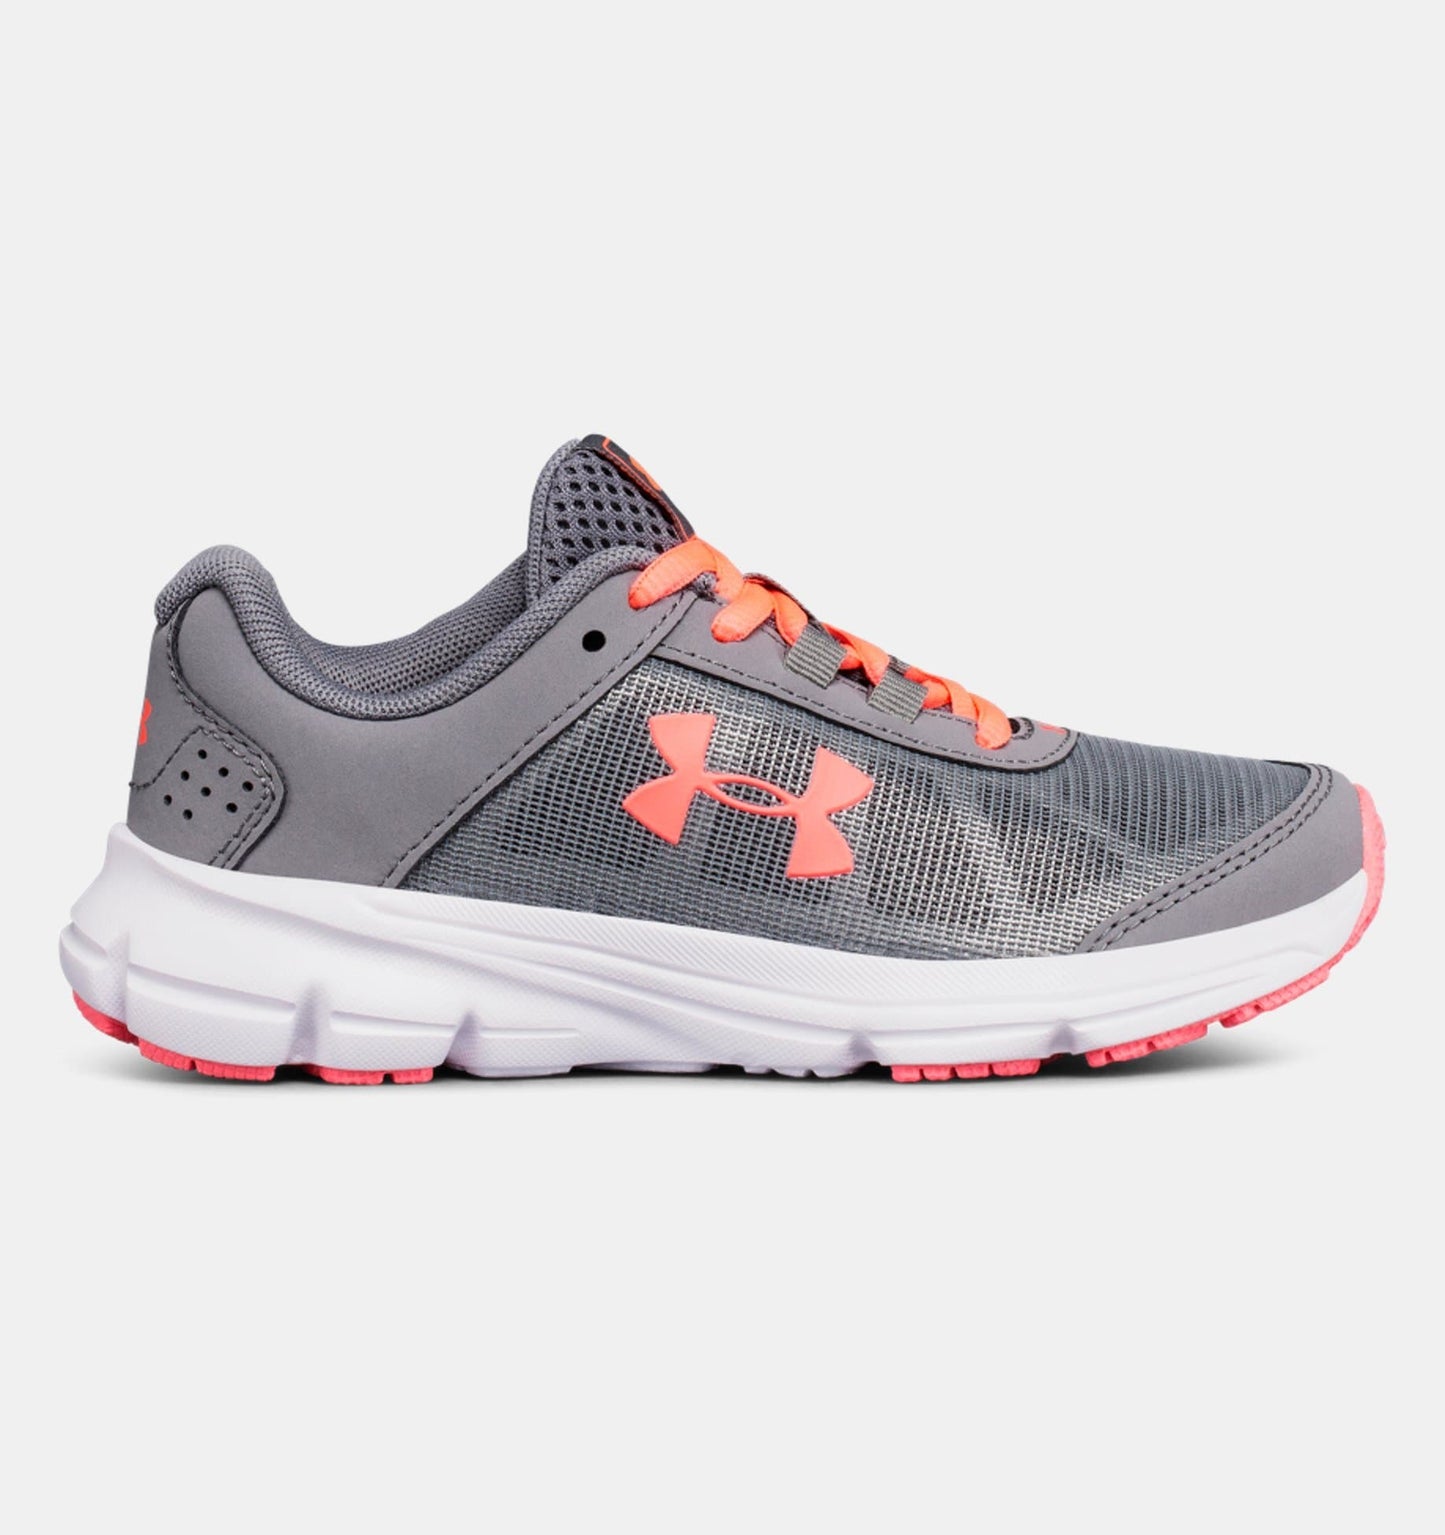 UNDER ARMOUR Kids Shoes 32 / Grey/Neon Pink GPS Rave 2